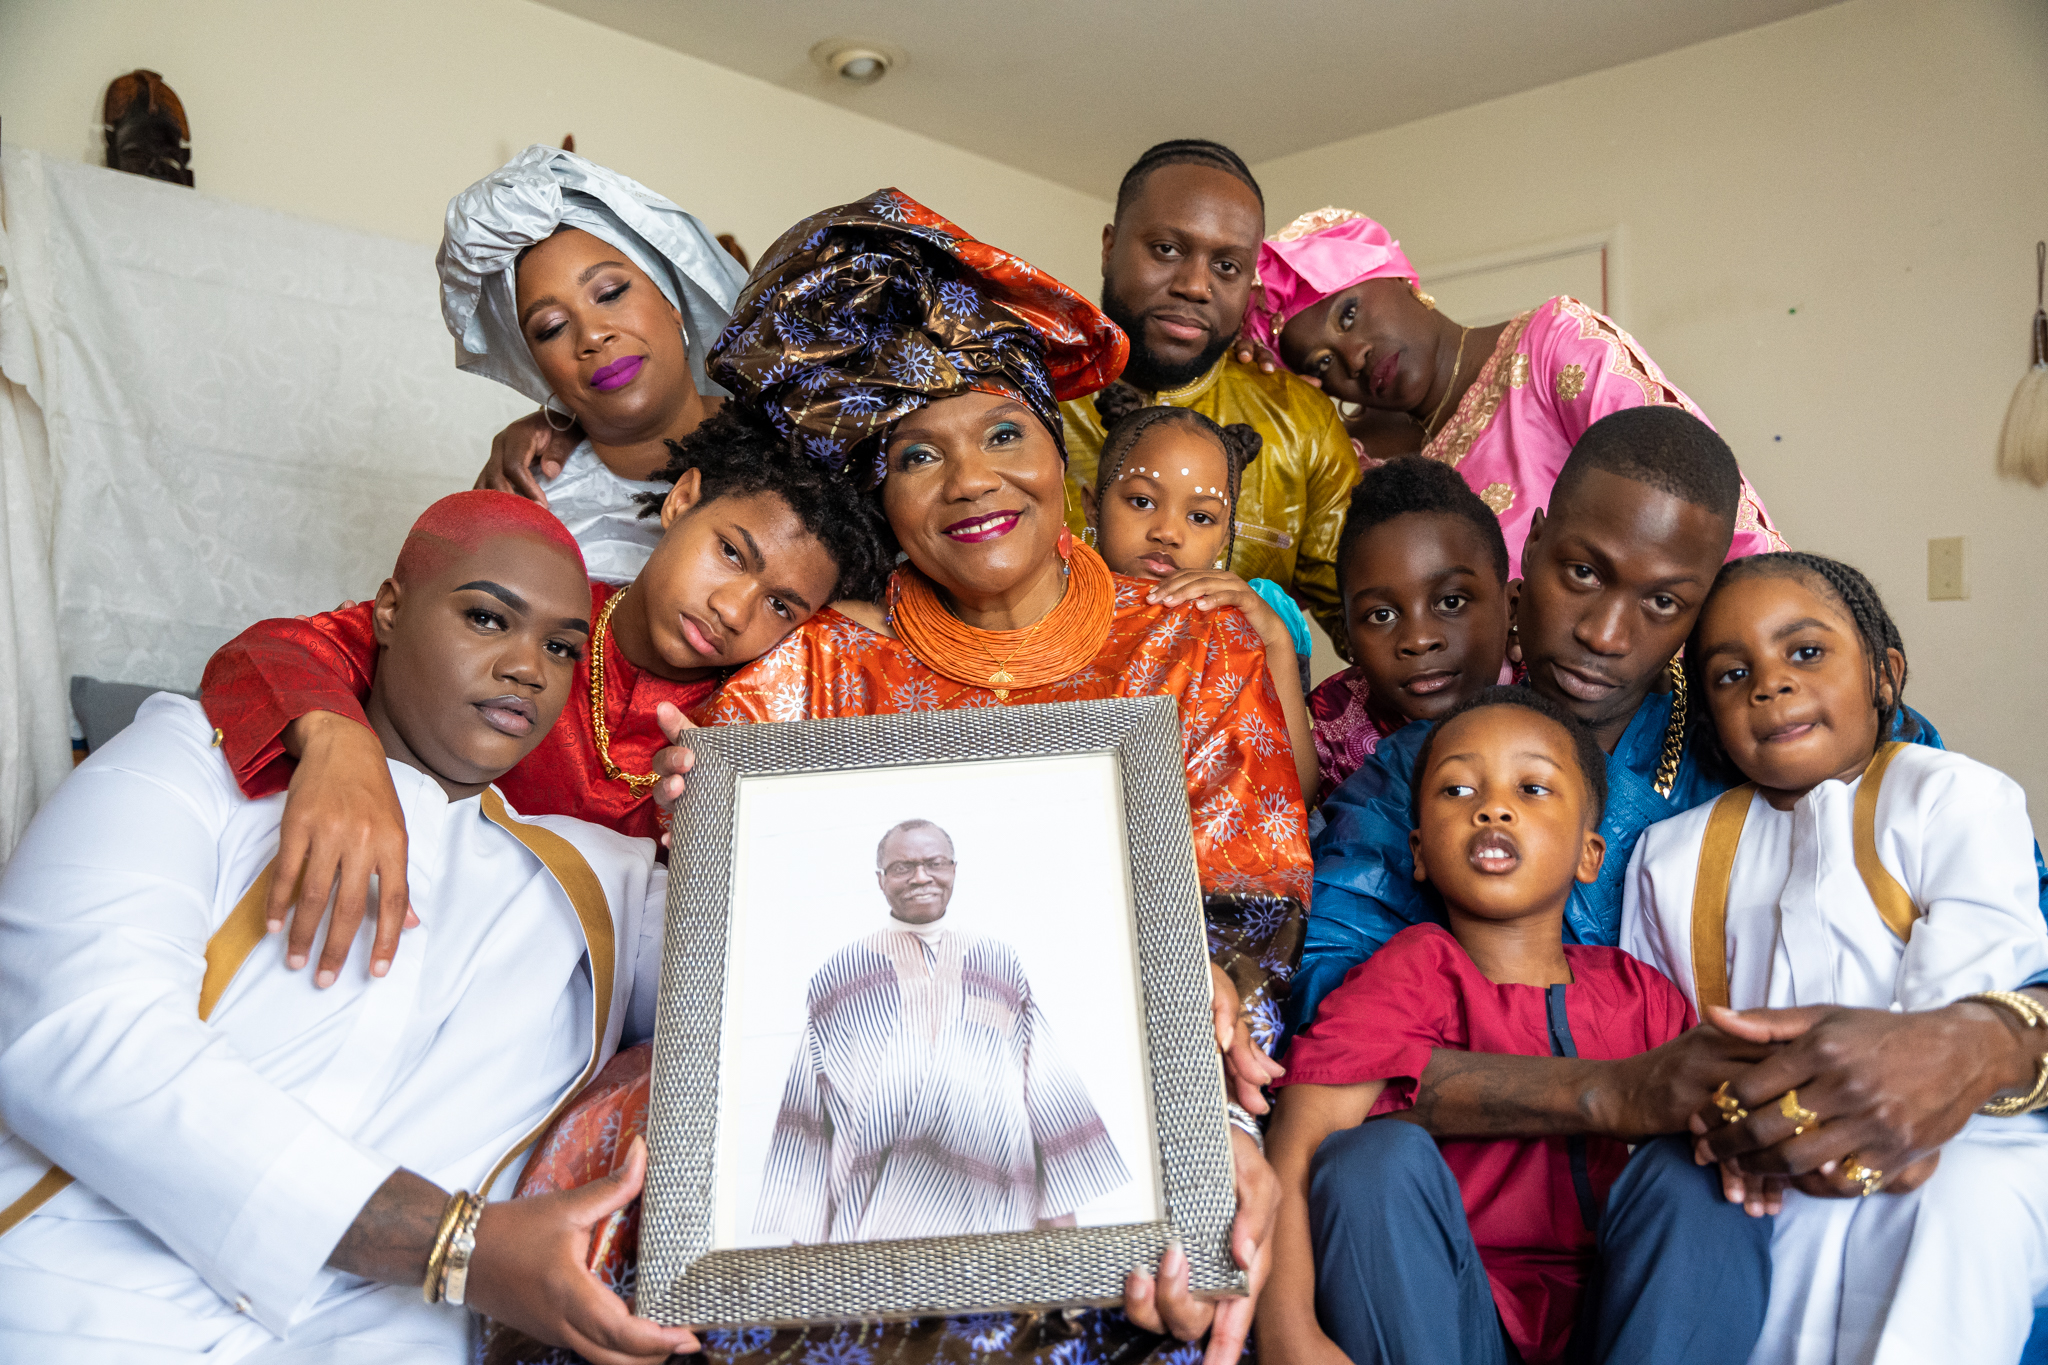 A group photo showing three generations of a family close together and holding a framed photo.